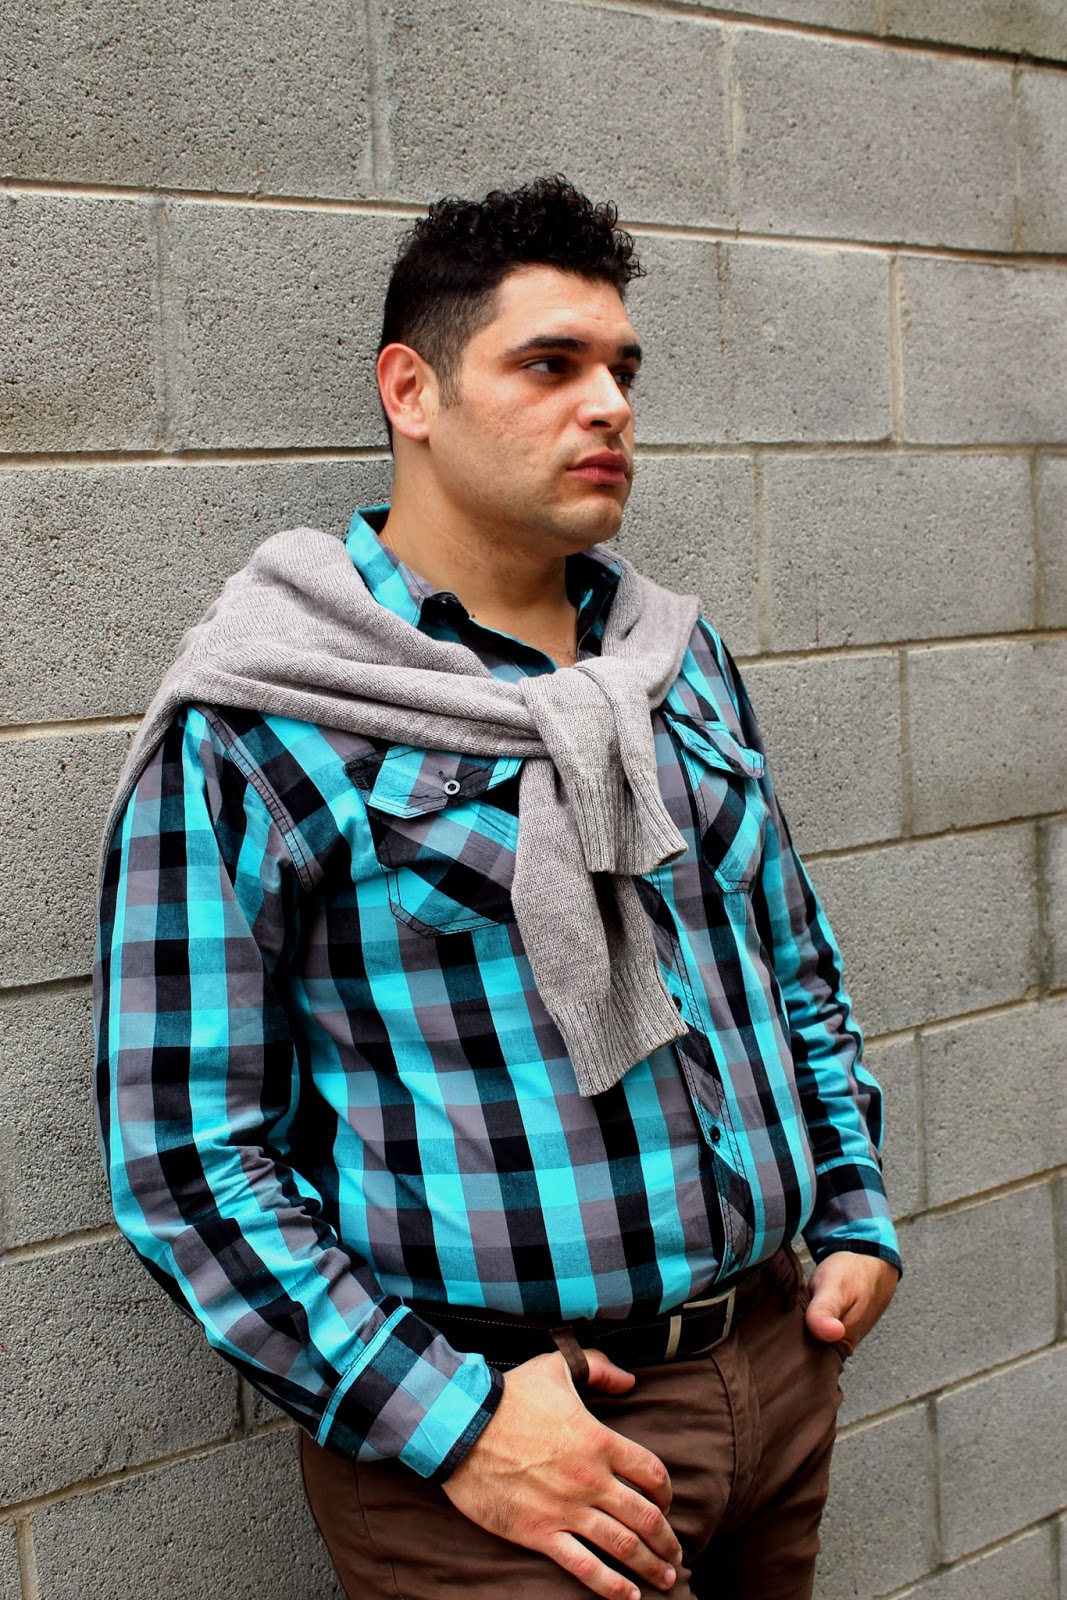 Curvatude Plus Size Fashion Beauty And Lifestyle Blog Big And within Big And Tall Mens Fashion